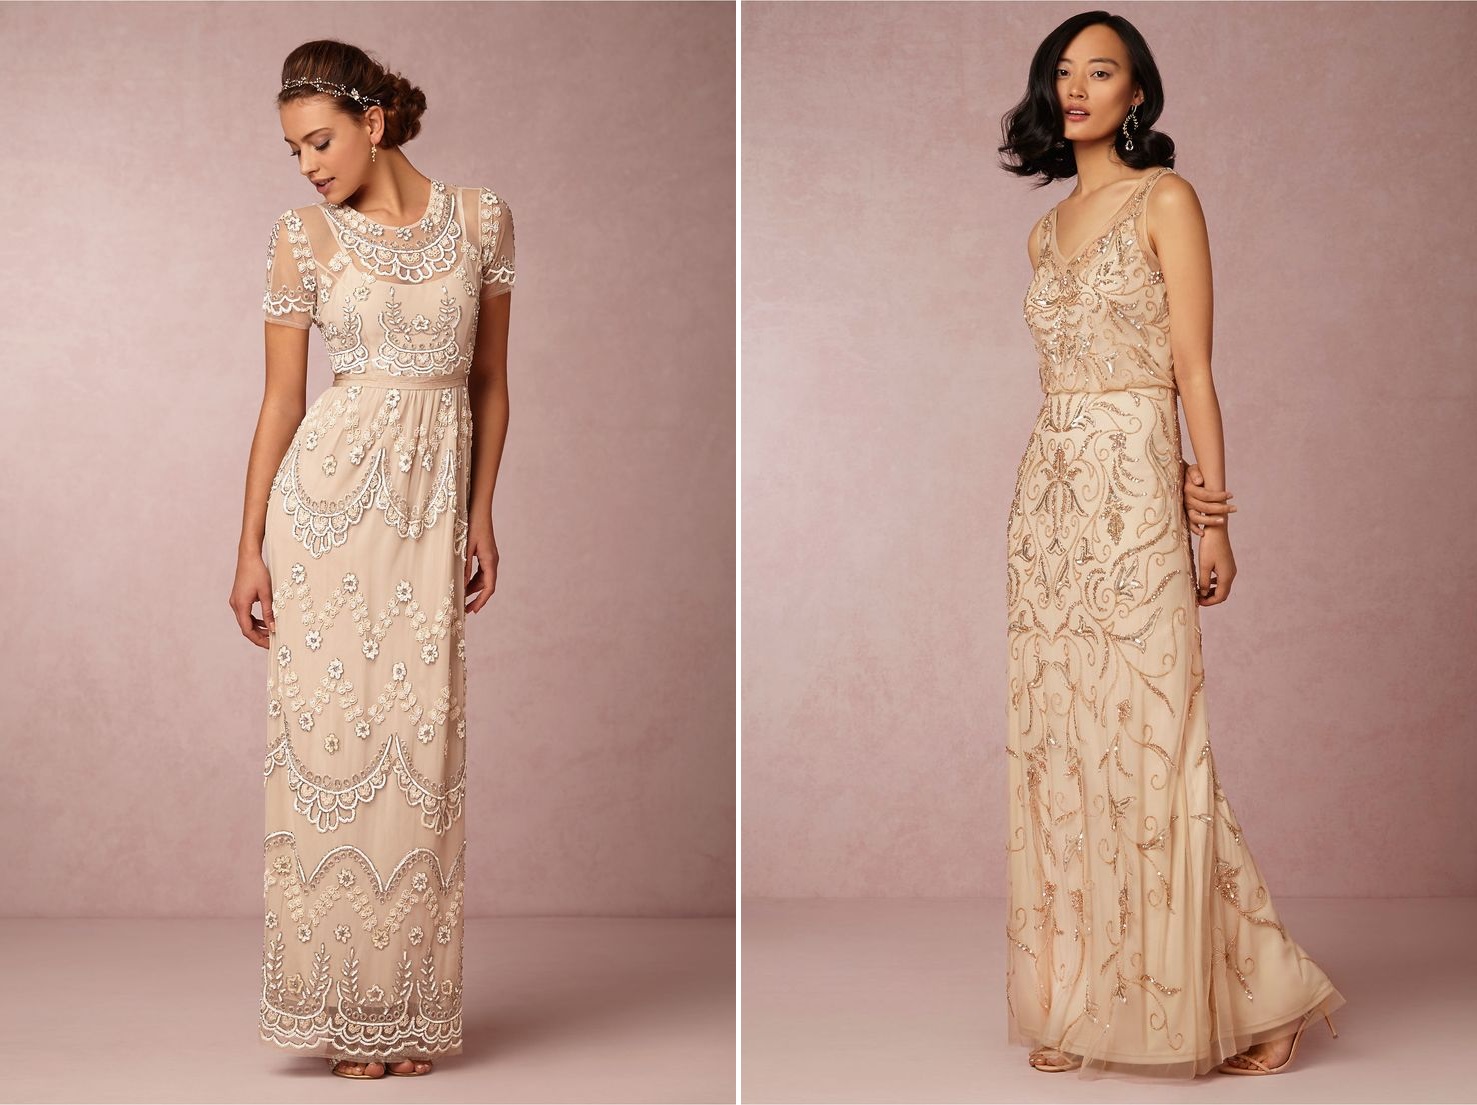 Tiered Petal & Ascot Blush Bridesmaid Dresses from BHLDNs Spring 2015 Collection